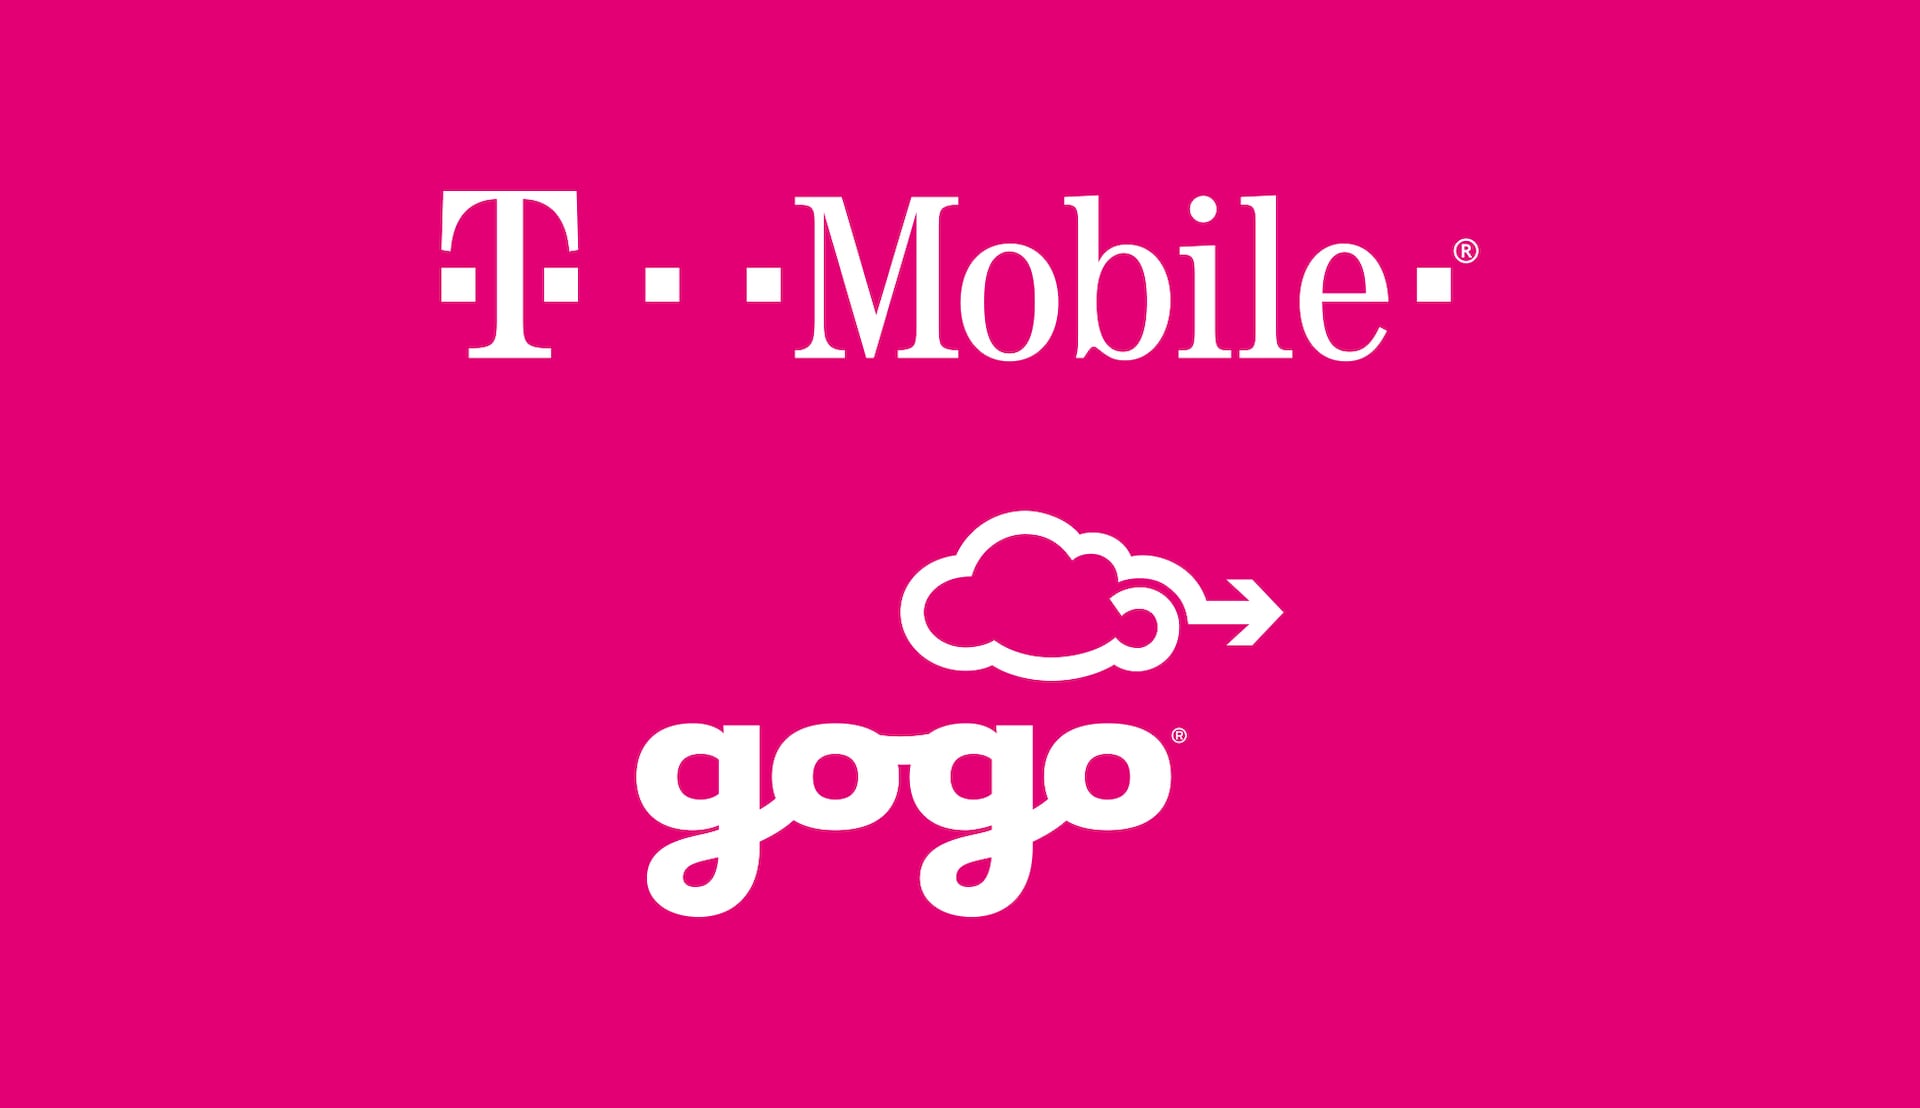 Gogo's T-Mobile sponsored in-flight wifi? Free? On a PC?!